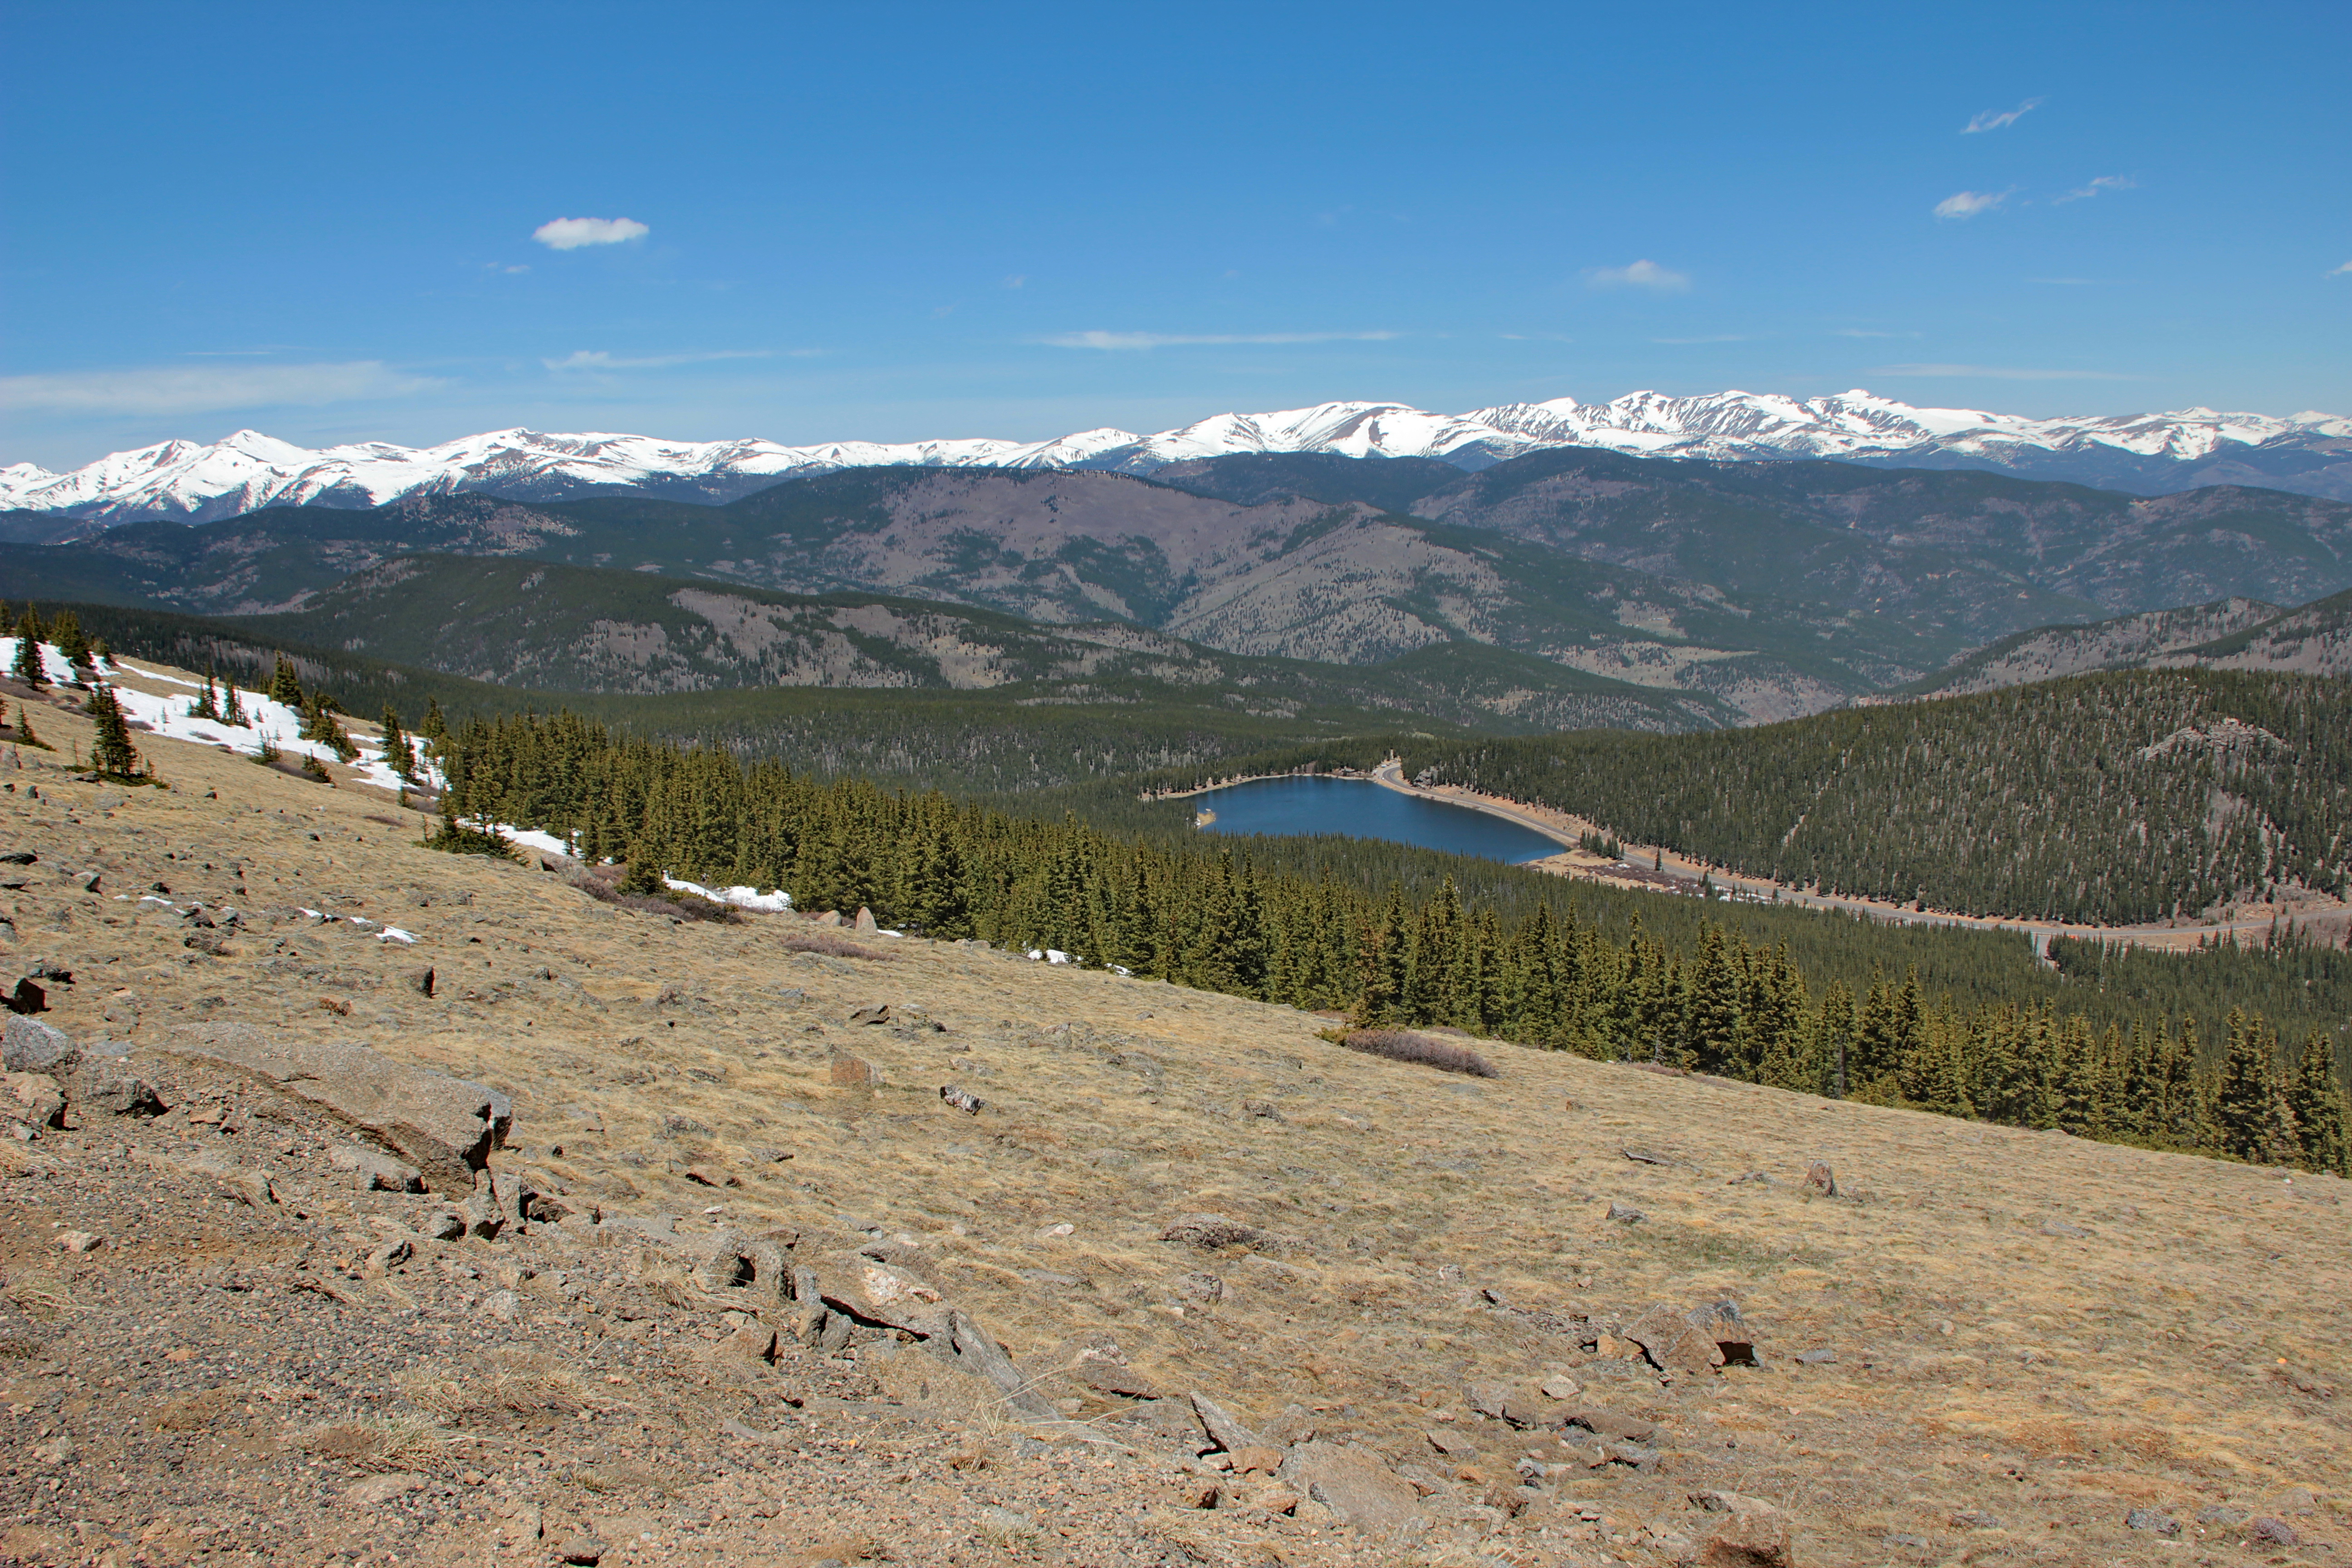 Looking down on Echo Lake from alpine tundra